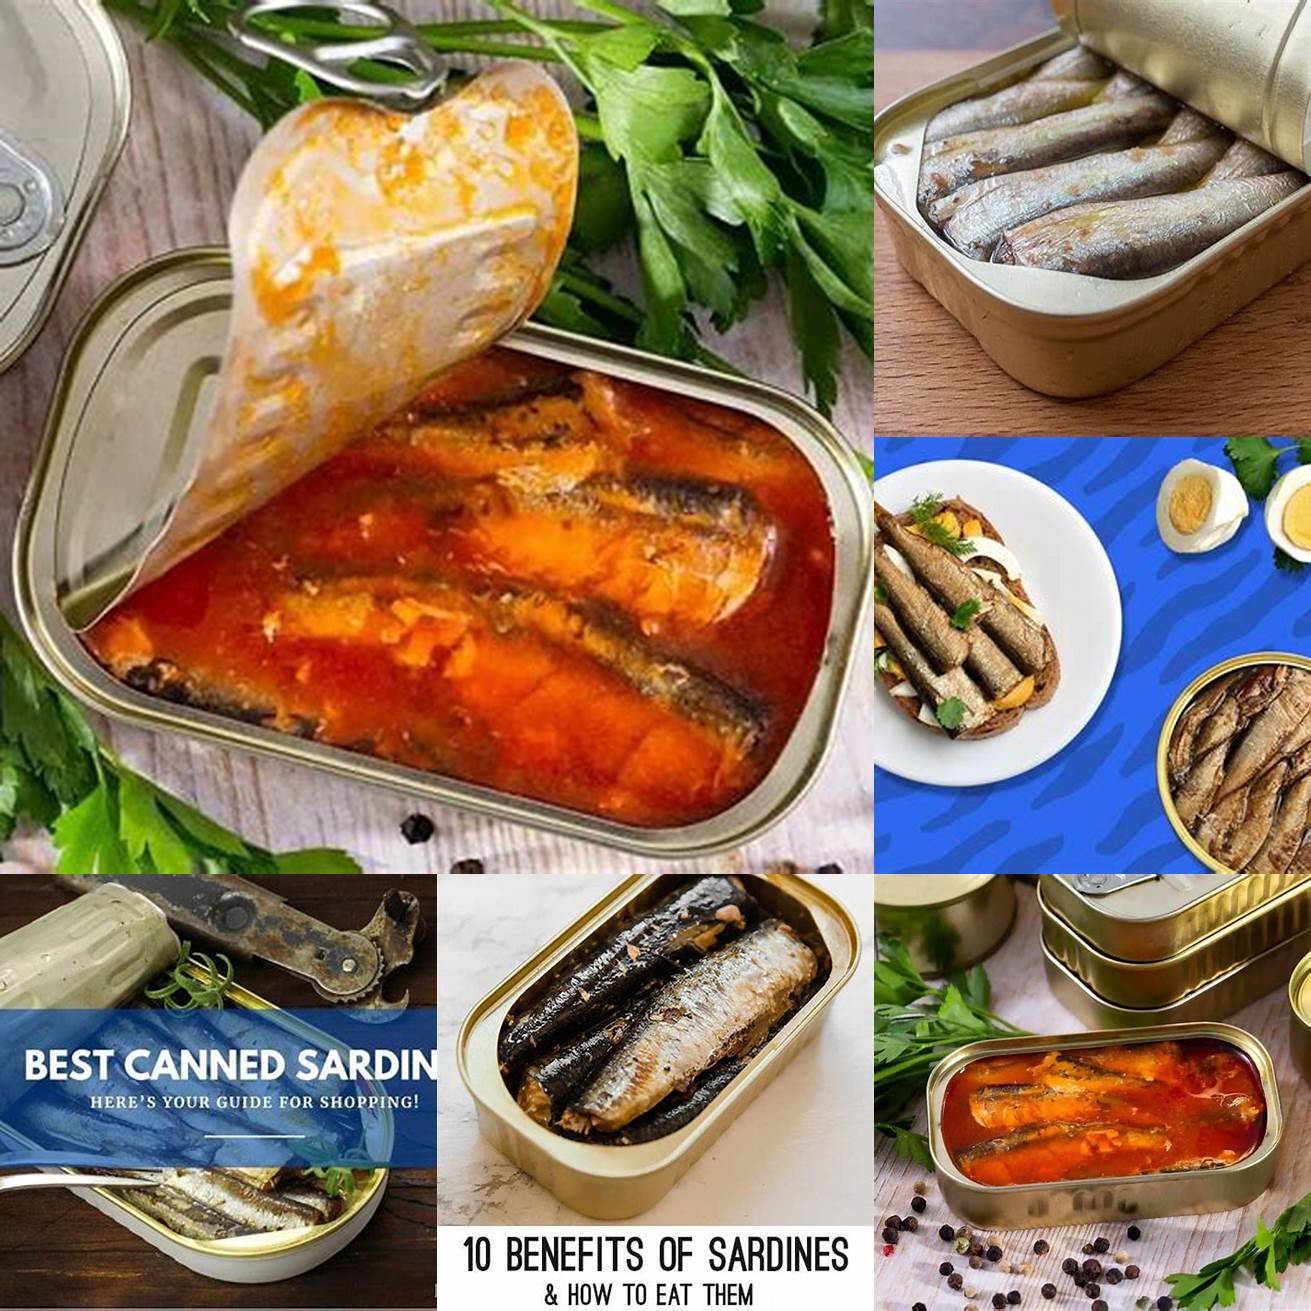 Canned sardines are easy to digest which makes them a great food option for cats with digestive issues